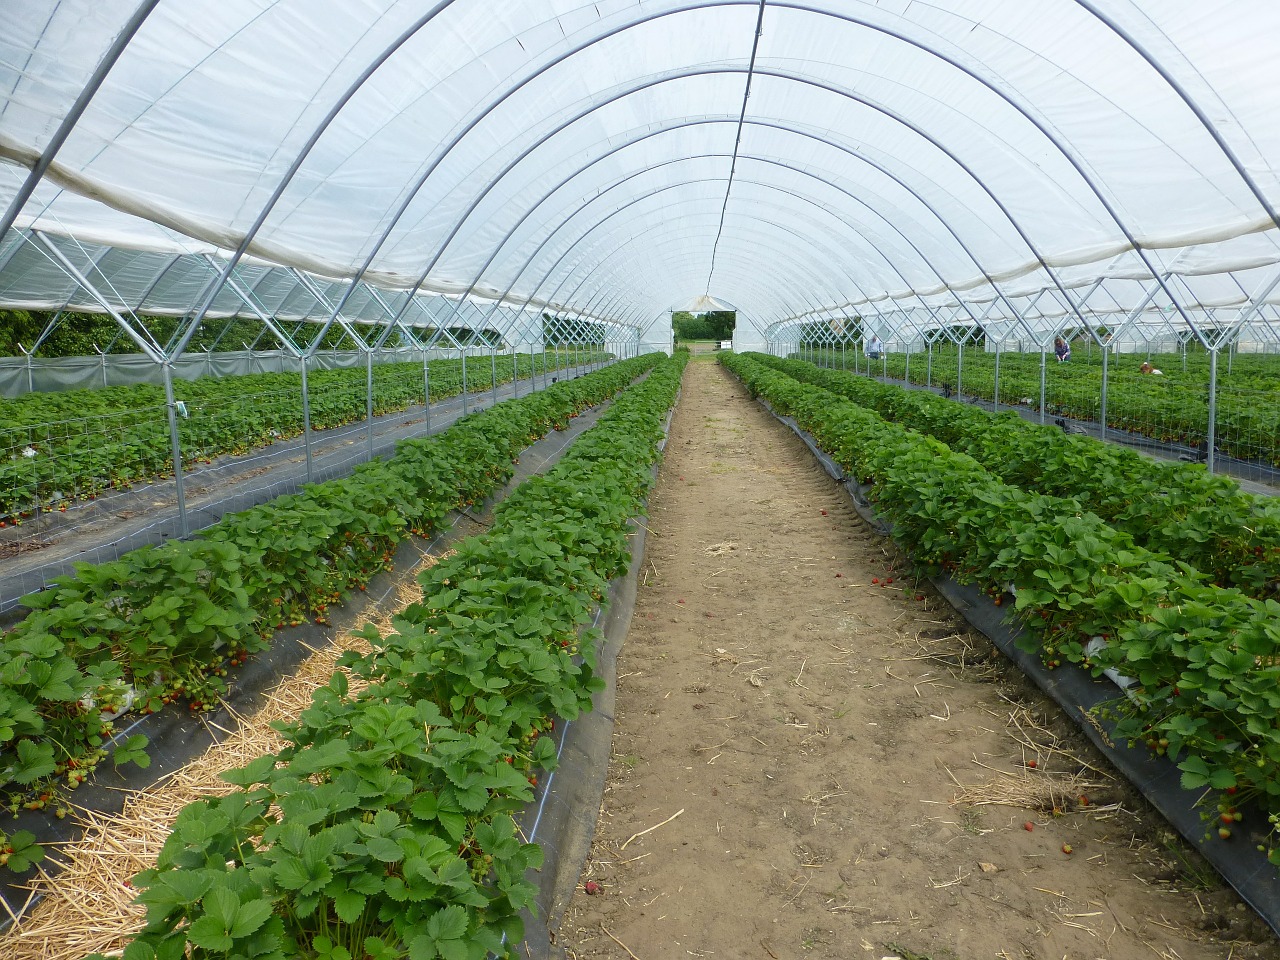 What Is The Purpose Of A Hoophouse On A Market Farm?